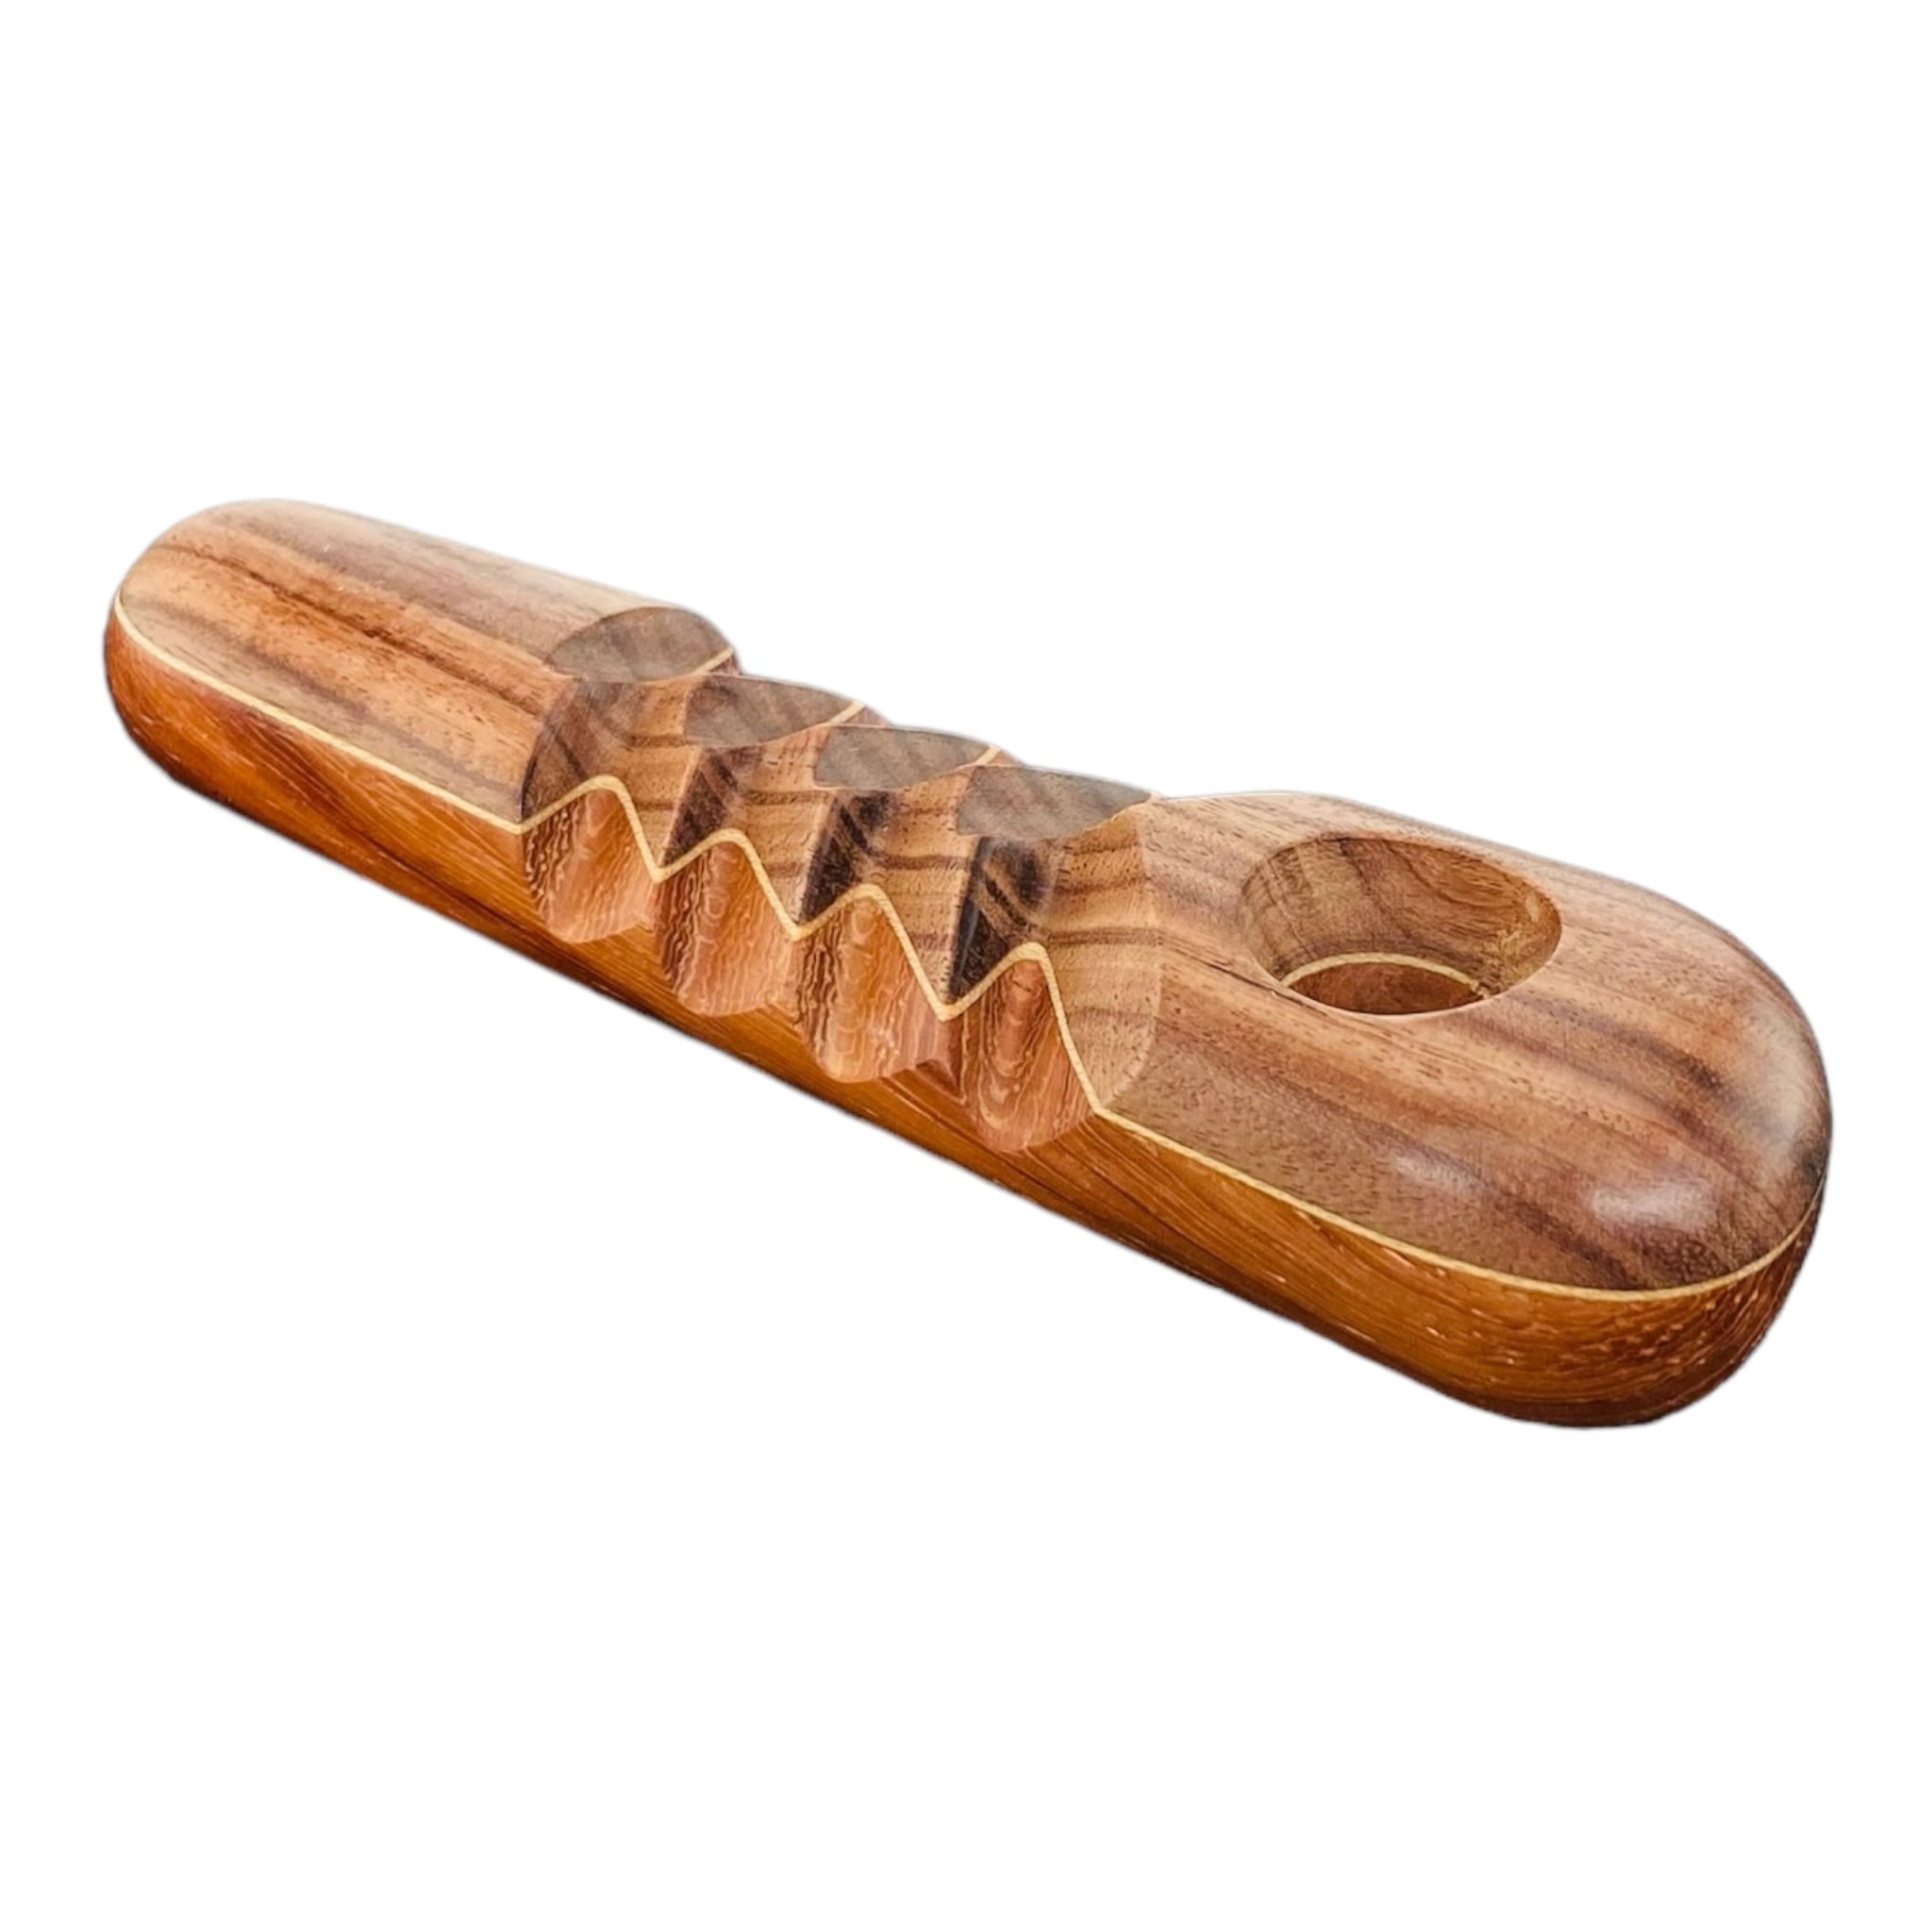 small pocket sized weed or tobacco wood smoking pipe